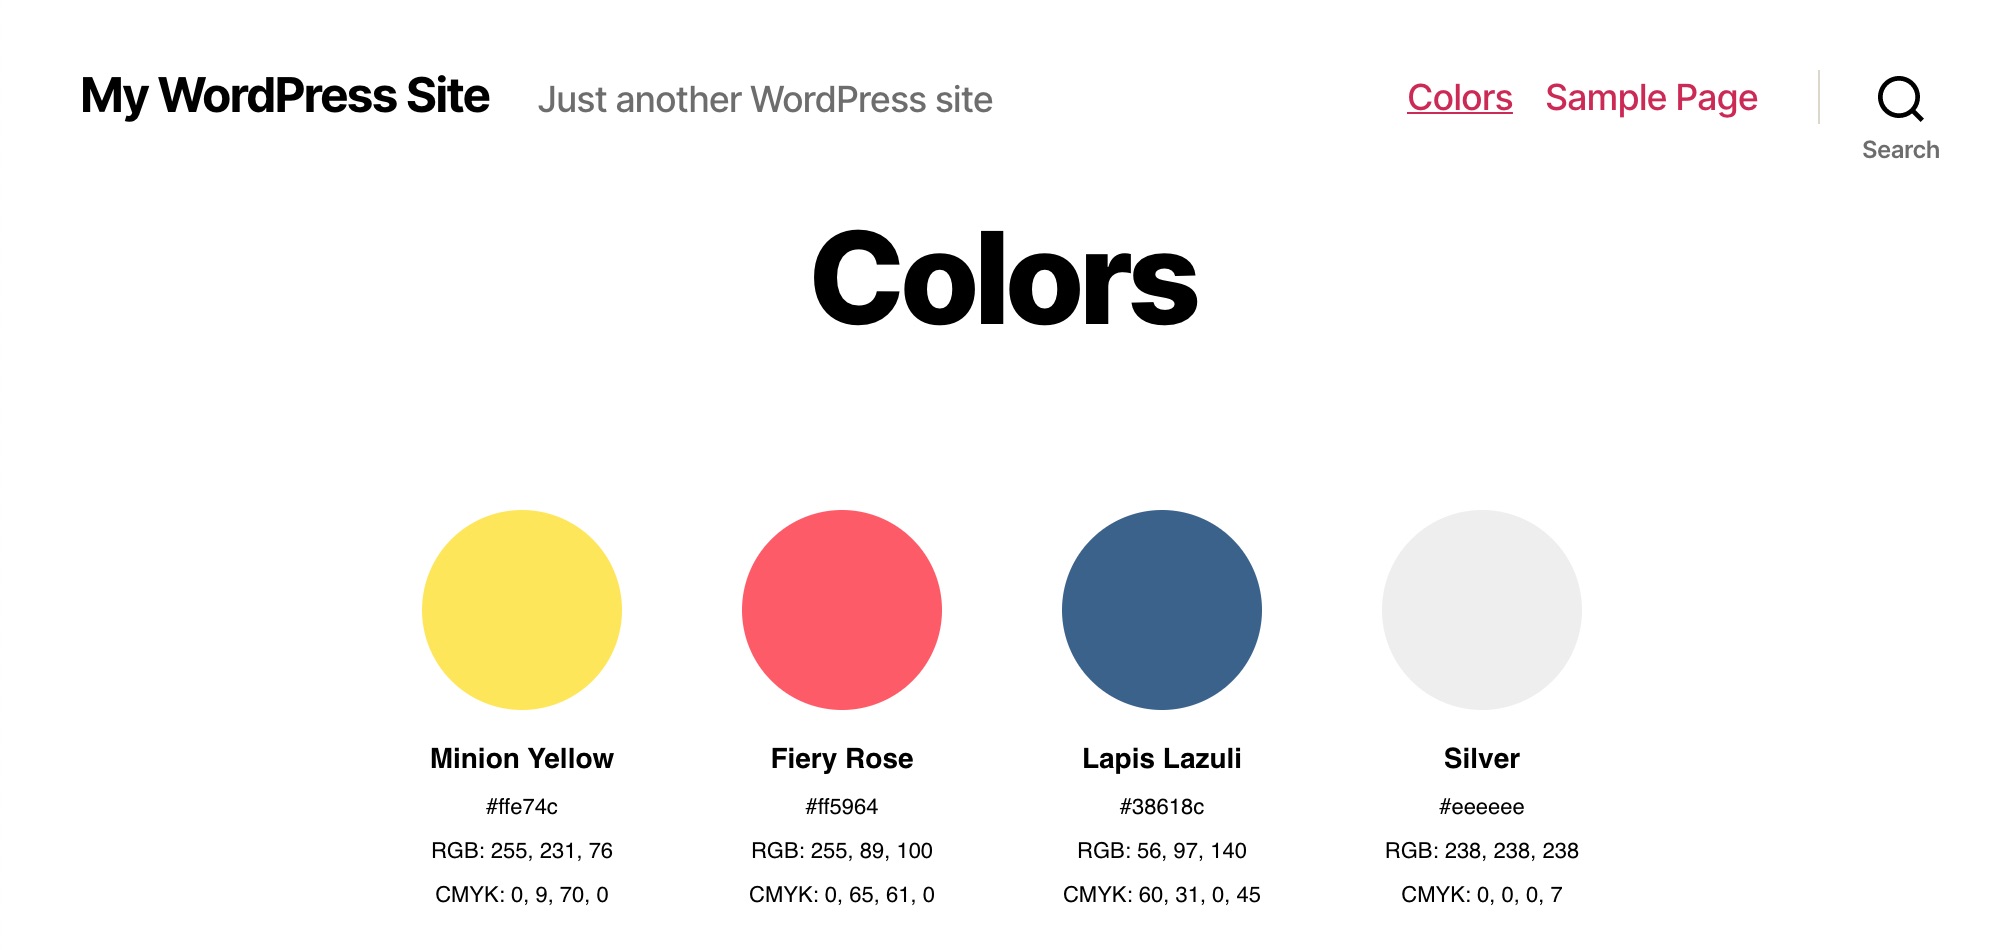 The Color Palette block in the front-end, displaying the colors as circles.